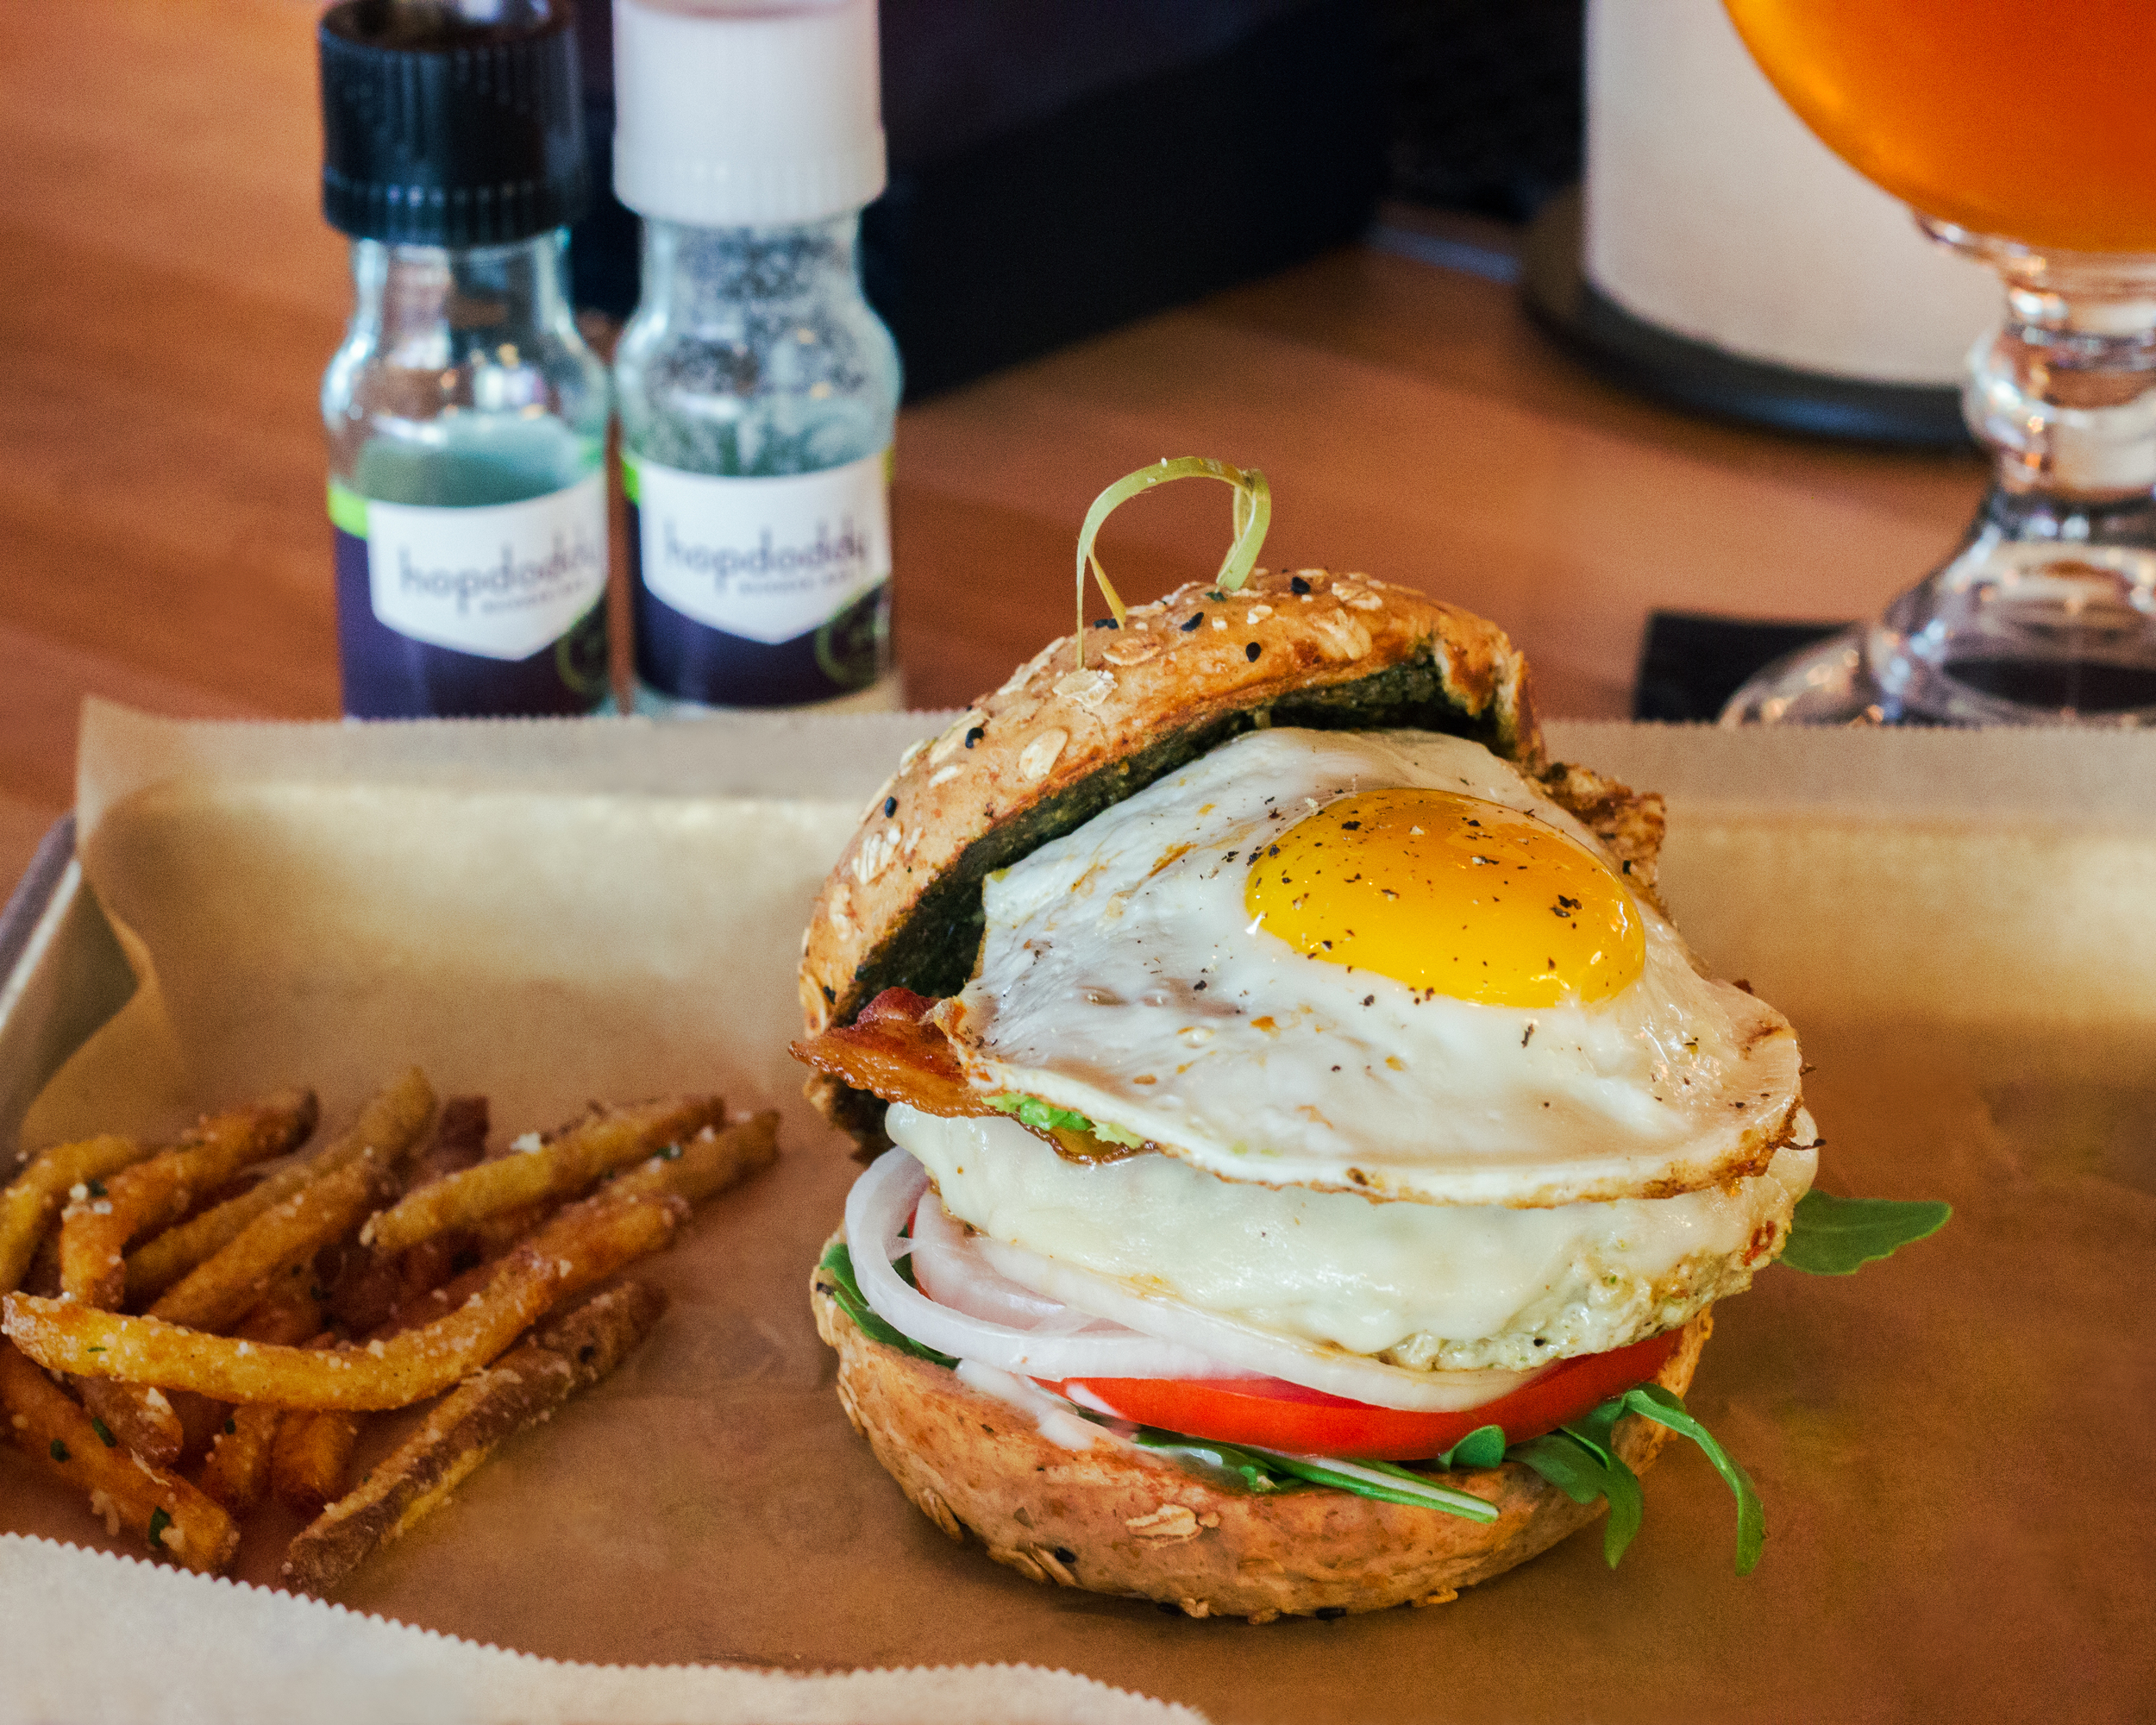 Place: HopDoddy